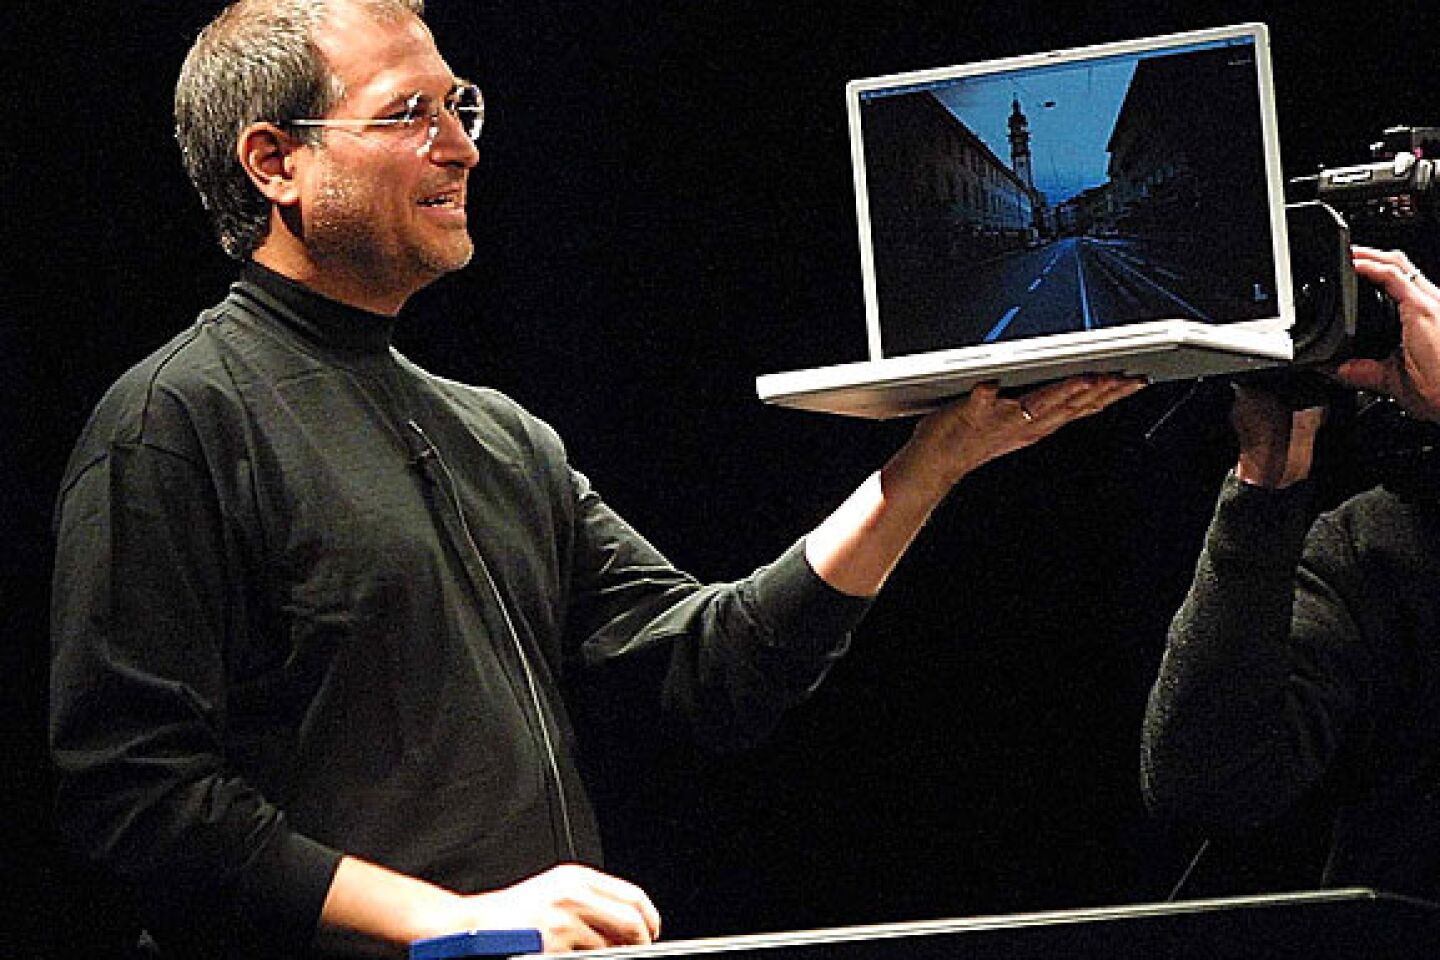 Jobs unveils a new titanium G4 Powerbook with a 15.2-inch screen at the 2000 MacWorld Expo in San Francisco. He also announced new configurations of the G4 desktop Macs as well as new audio and DVD software.